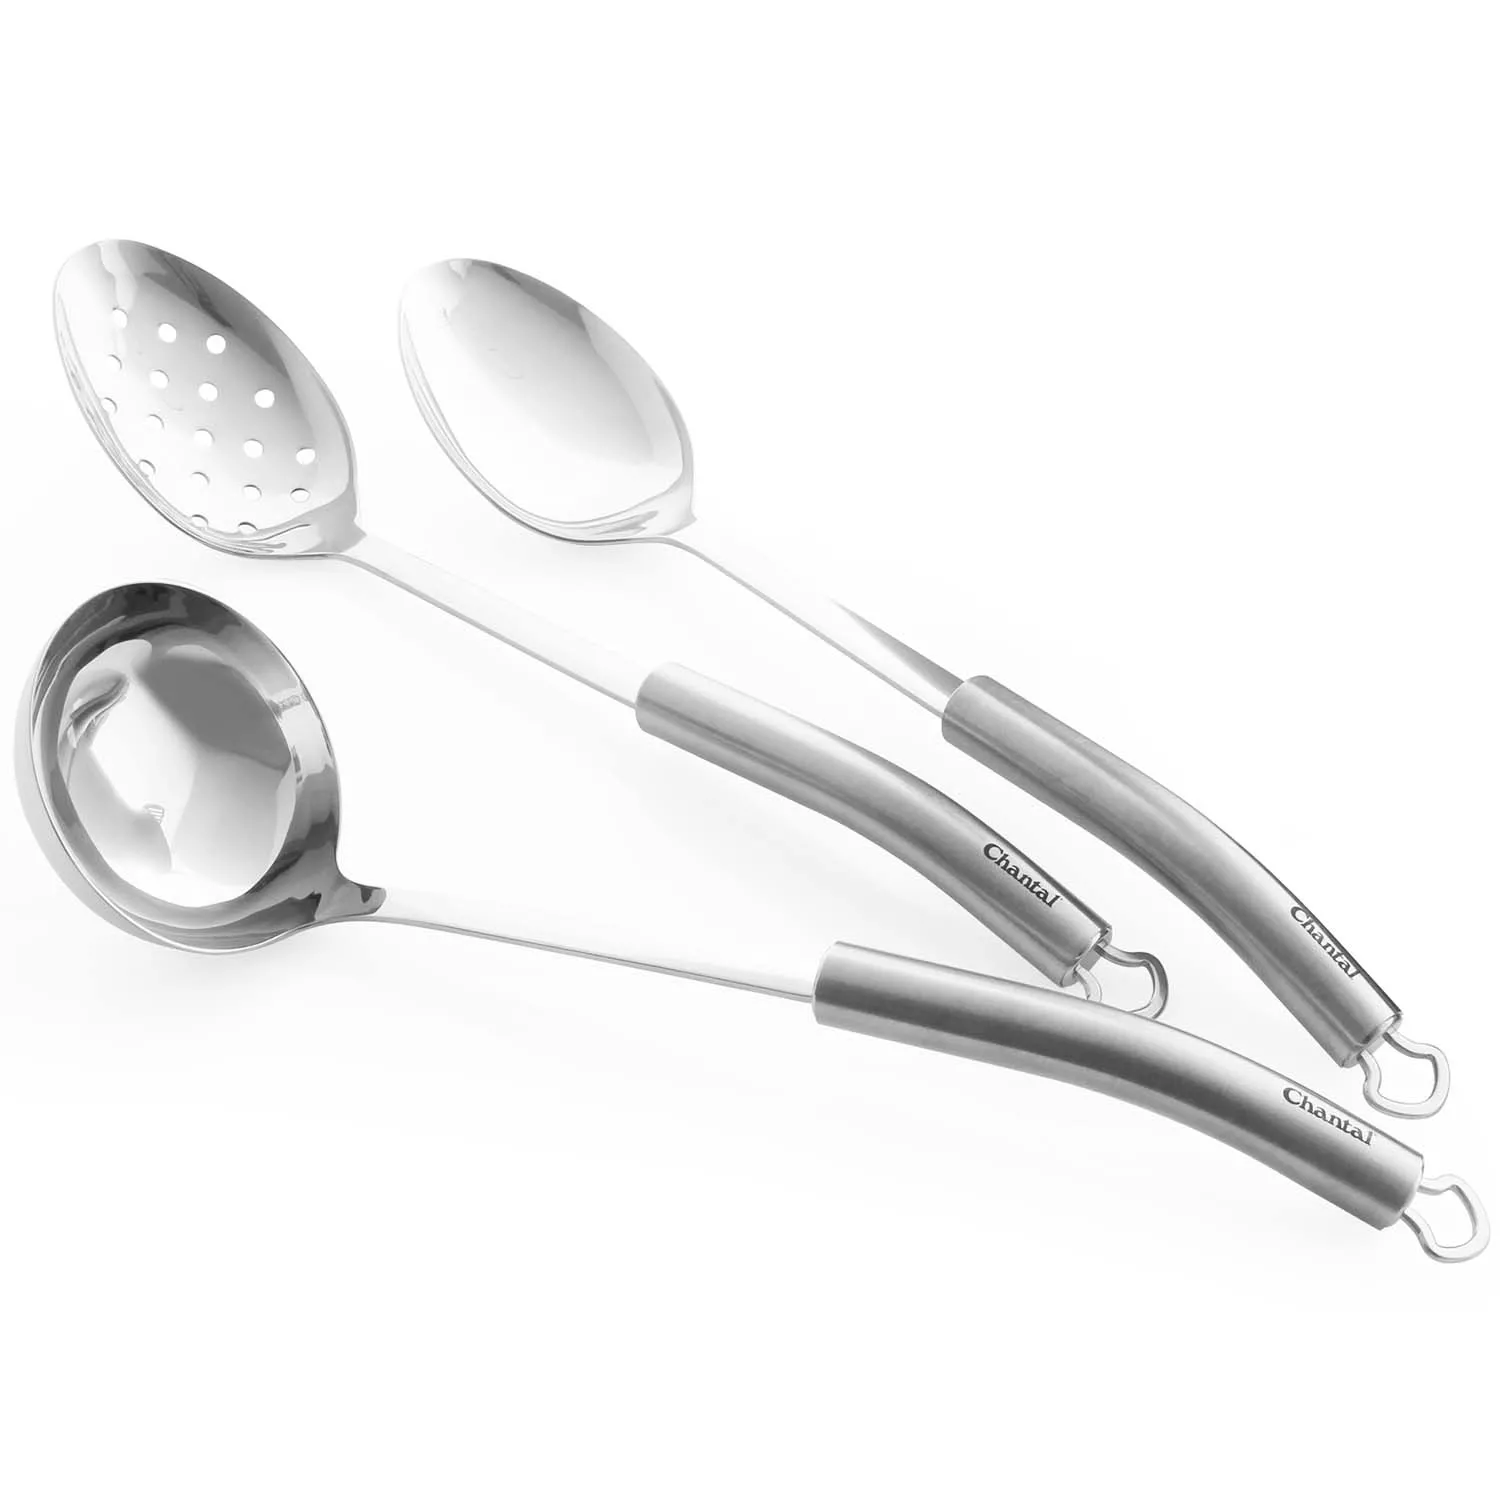 One measuring spoon to rule them all - The Gadgeteer